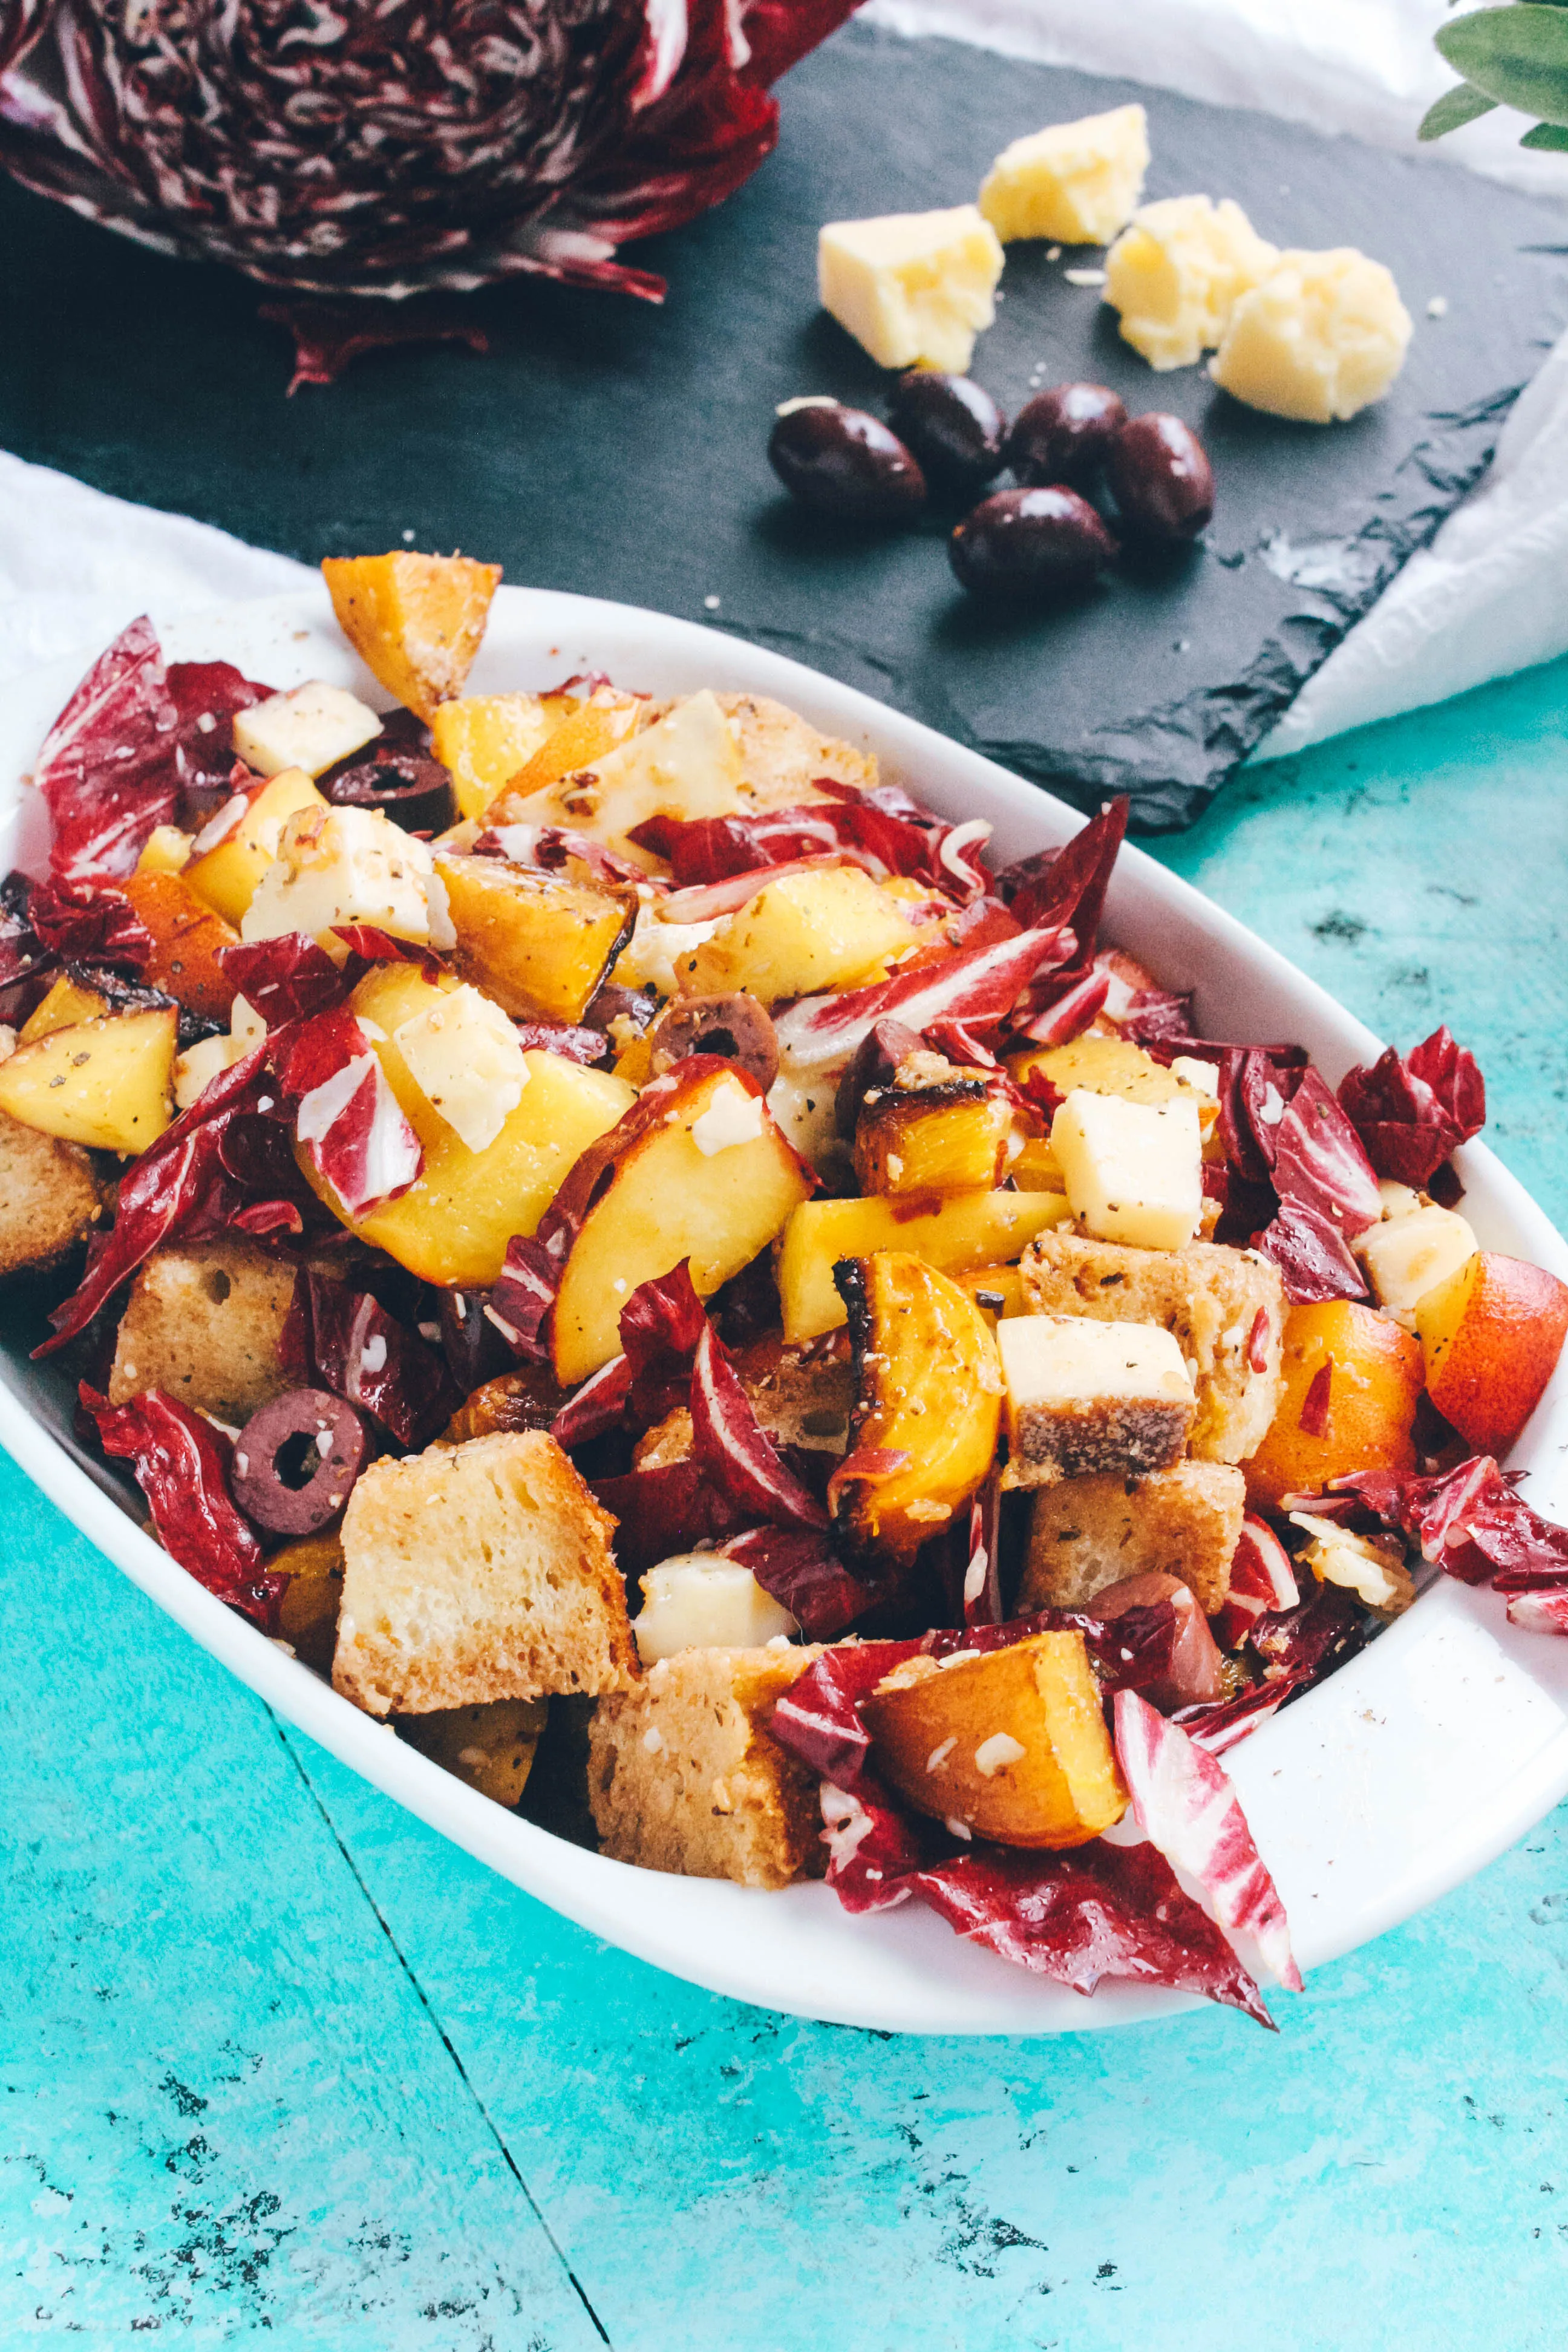 Roasted Beet, Peach & Radicchio Panzanella Salad is hearty and flavorful. Try Roasted Beet, Peach & Radicchio Panzanella Salad this season for a new go-to salad.